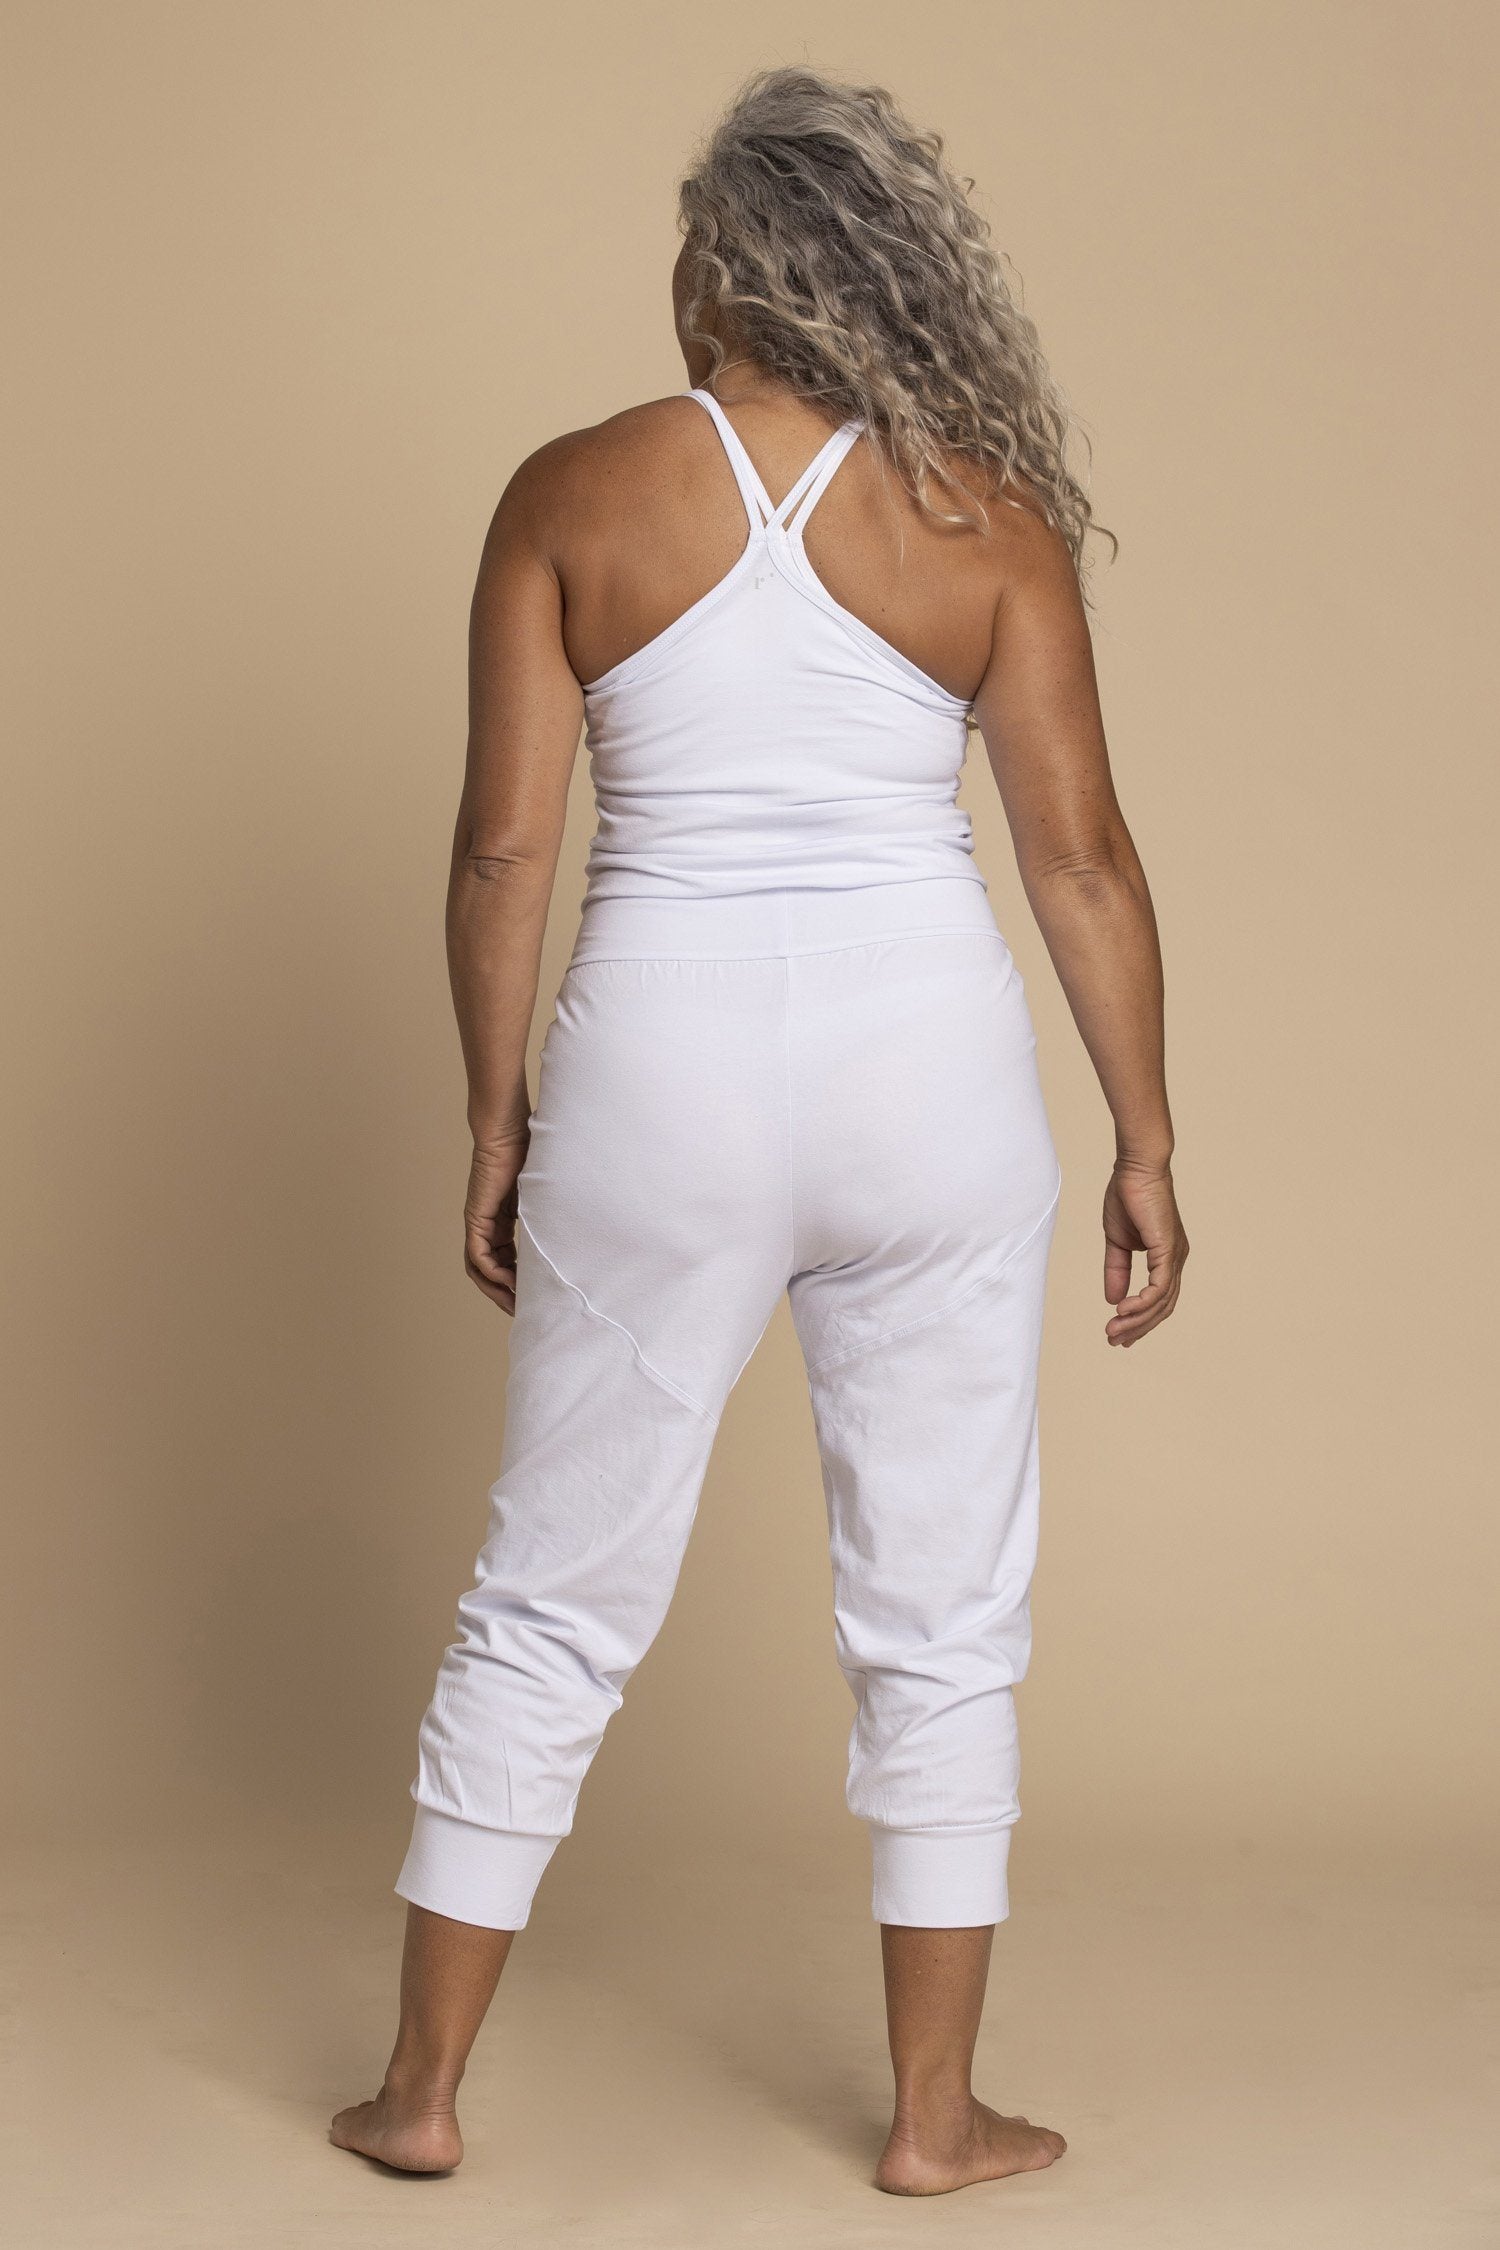 ripple yoga wear jumpsuits | Physical fitness, Yoga clothes, Diy yoga  clothes